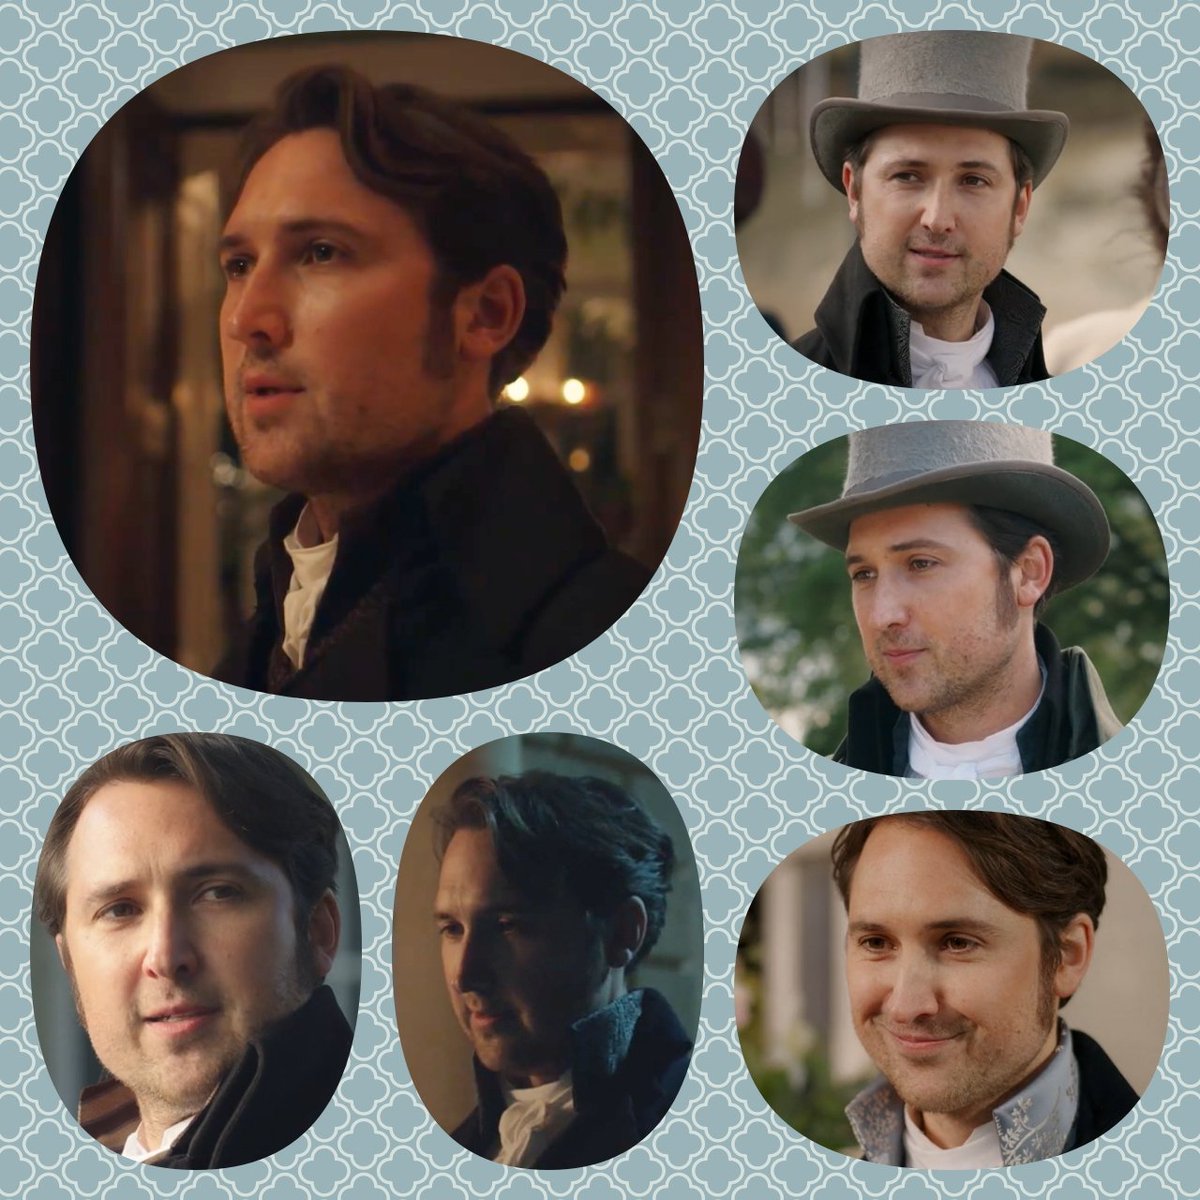 Just because... those loving eyes made us fall in love with him even more 💘❤️‍🔥💖

Celebrating #BenLloydHugues's  wonderful performance as #AlexanderColbourne in #Sanditon! ✨️👏

Happy #HuguesdayTuesday to all! 🥰

#BLH #BurningLavaHot